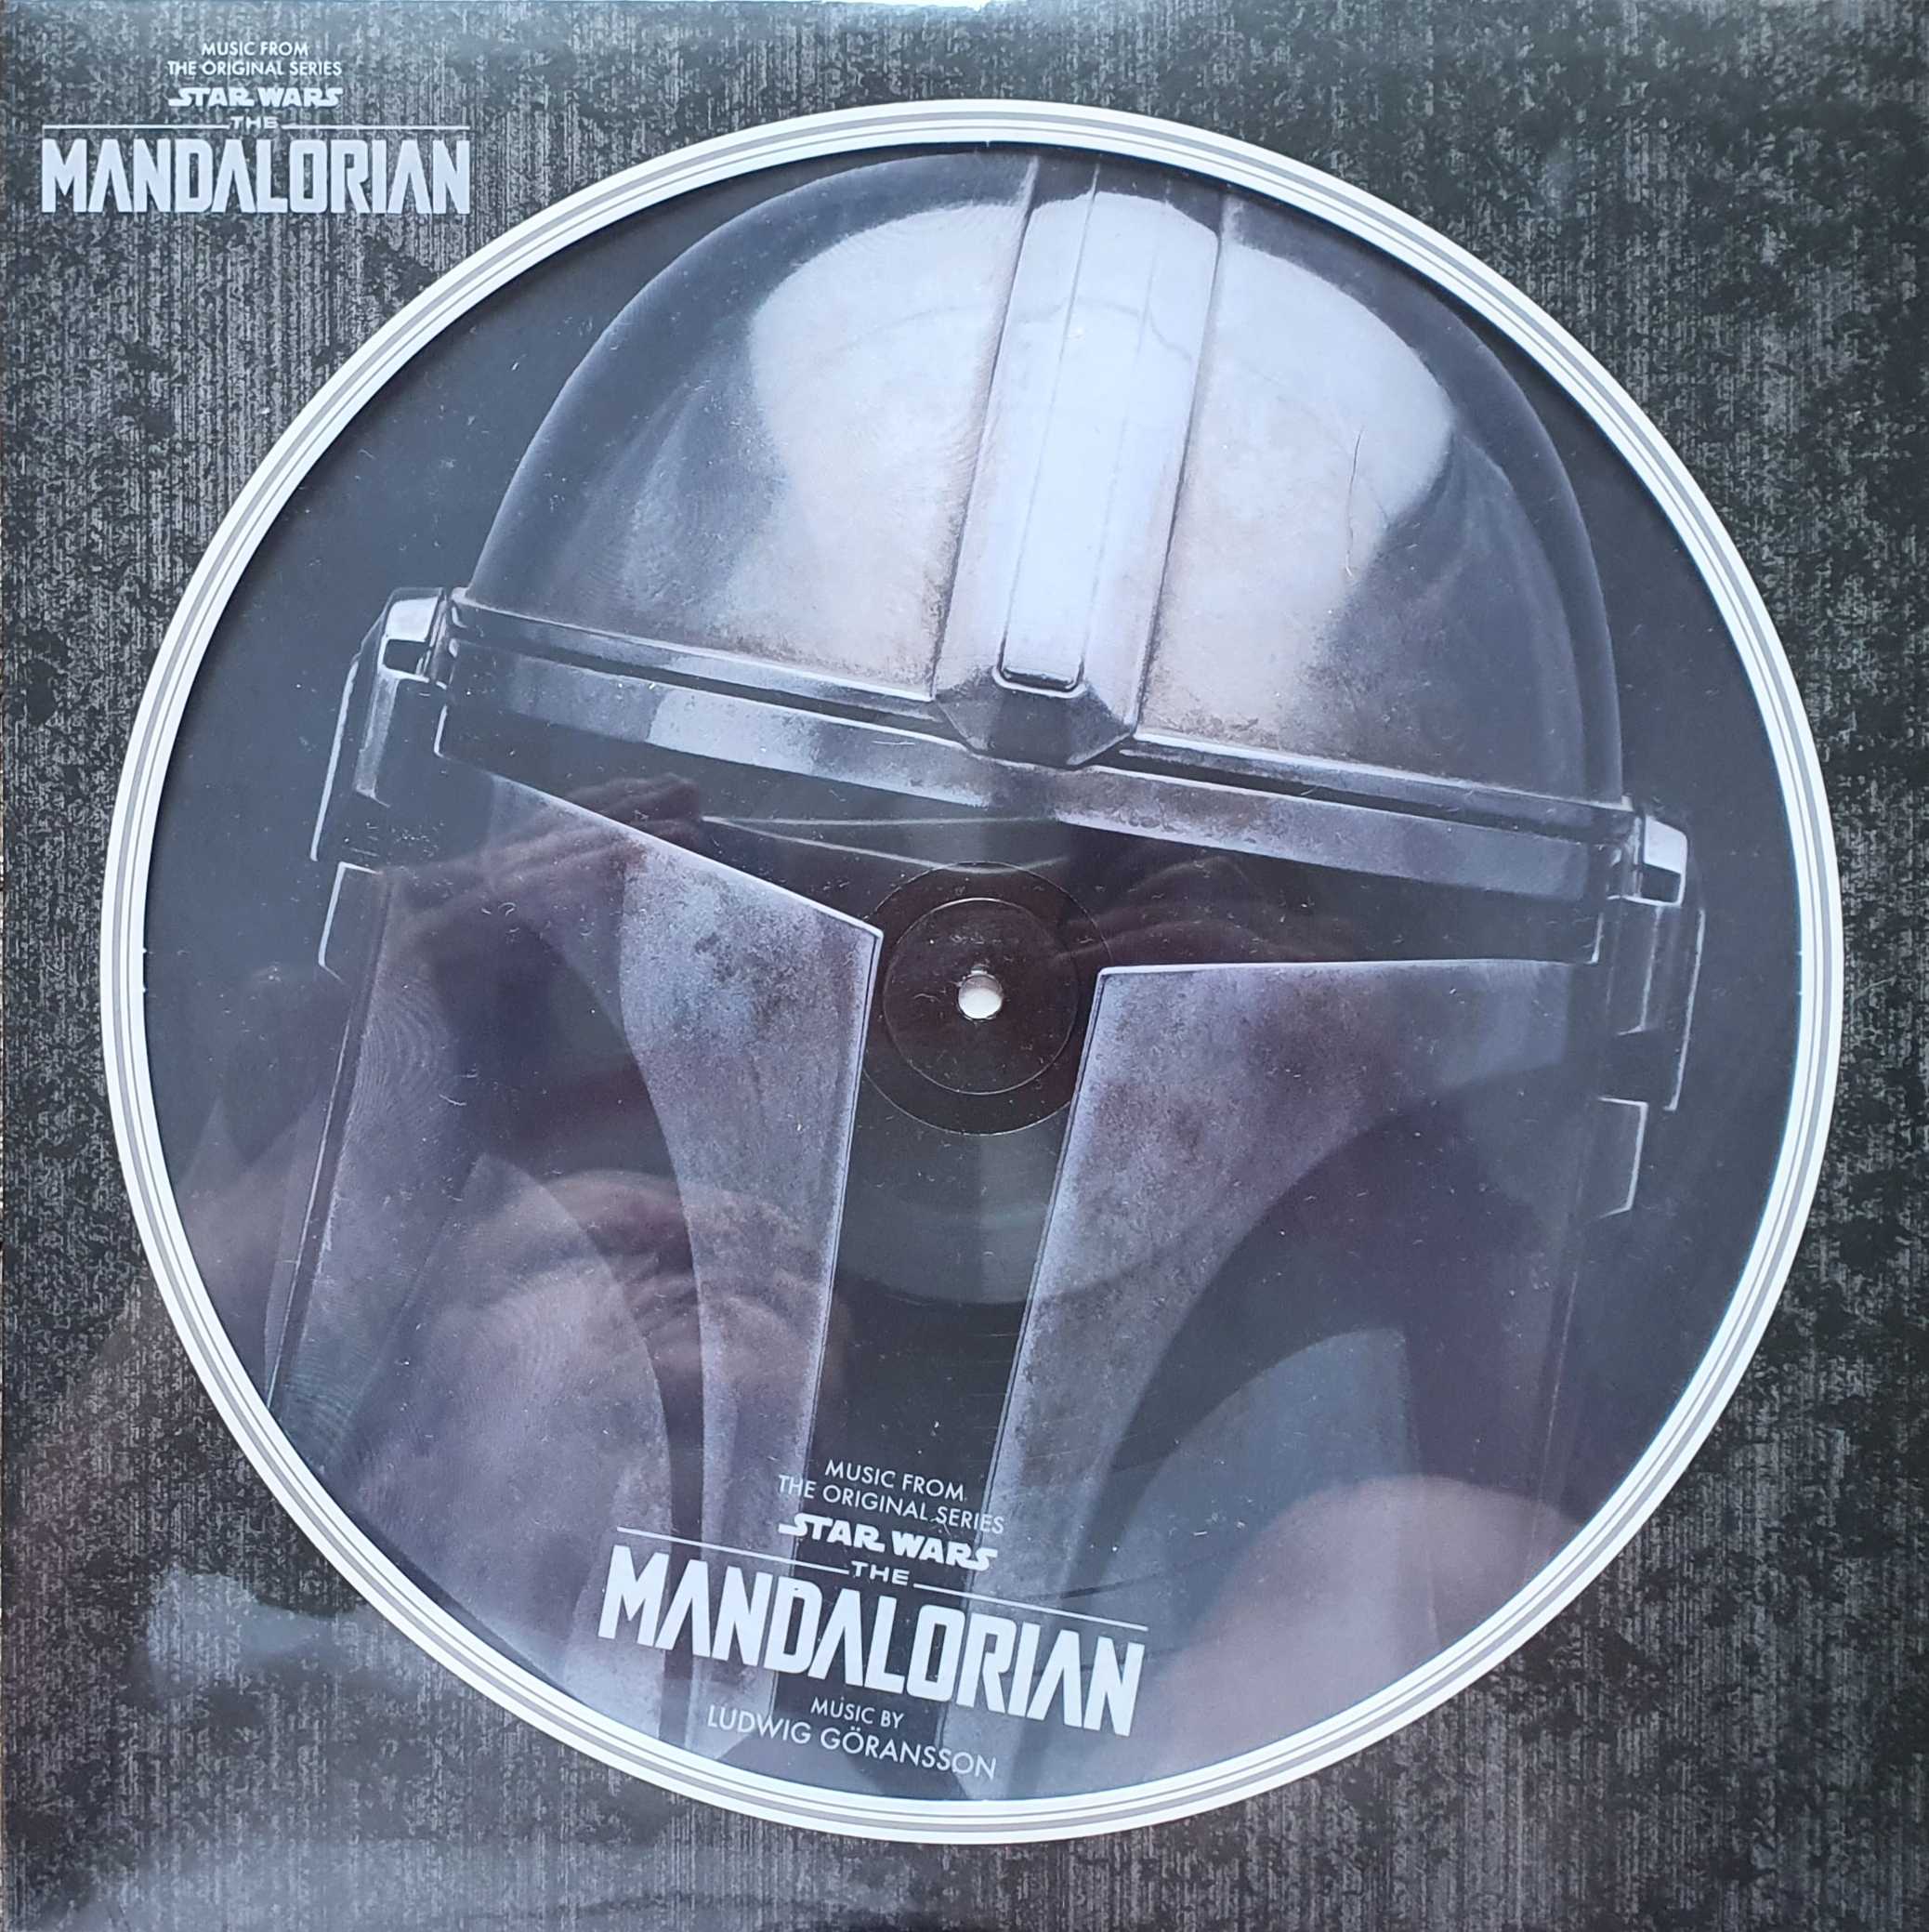 Picture of Star Wars: The Mandalorian (Music From The Original Series) by artist Ludwig Goransson from ITV, Channel 4 and Channel 5 albums library